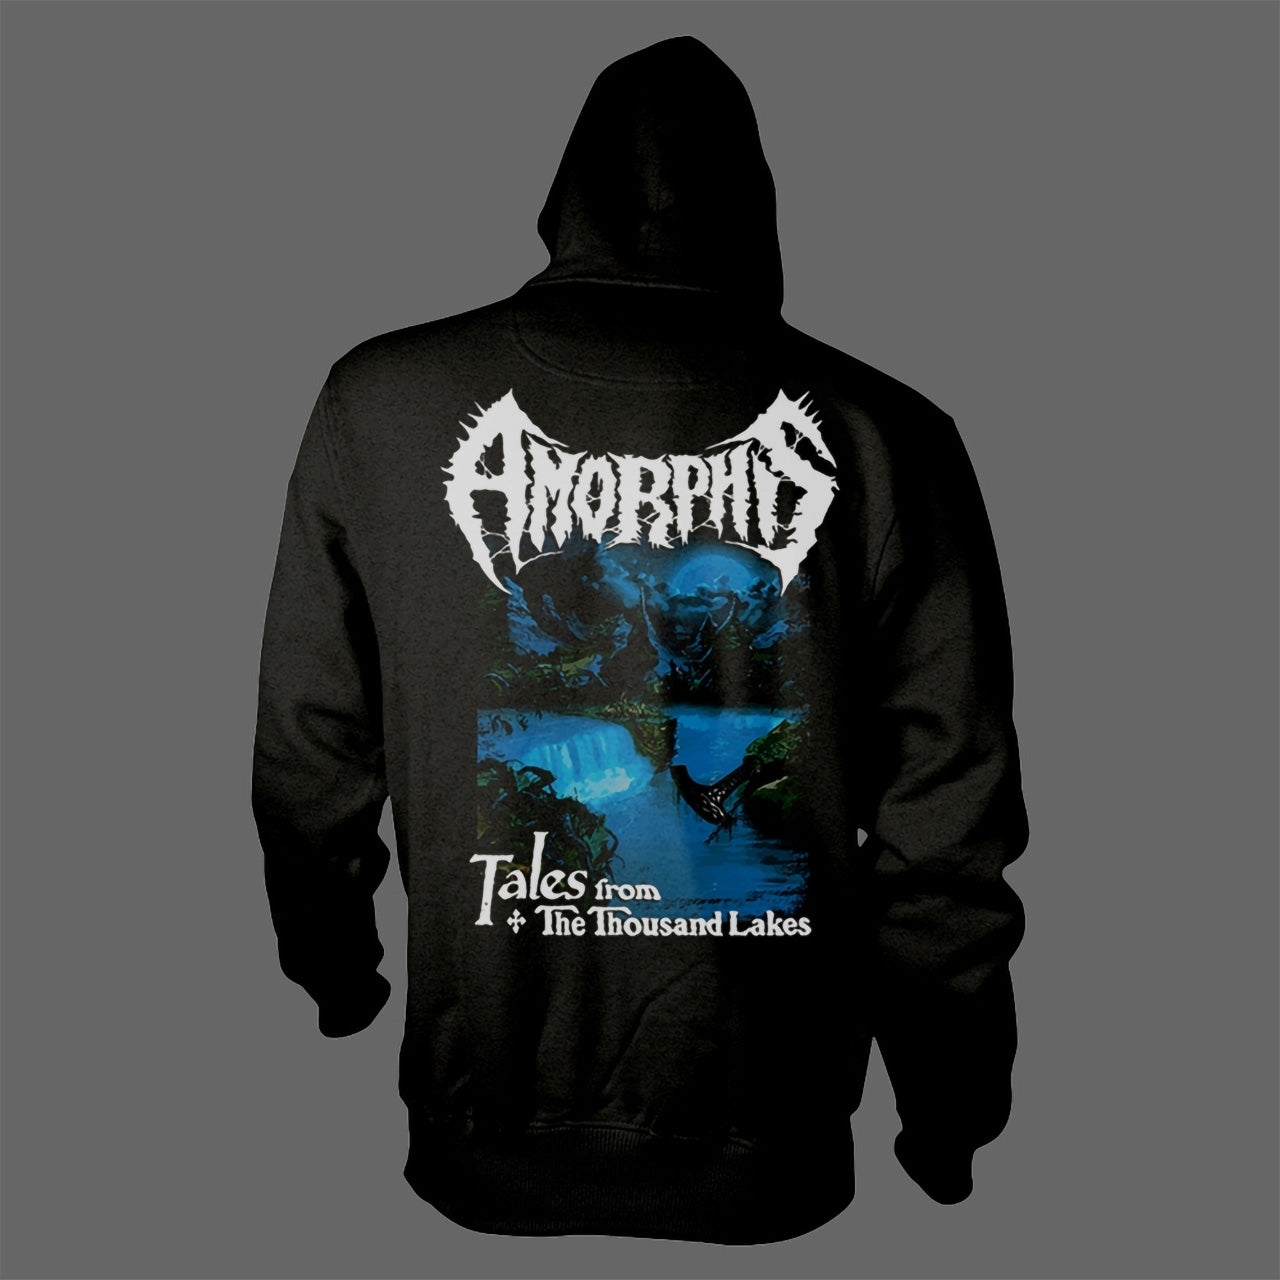 Amorphis - Tales from the Thousand Lakes (Full Zip Hoodie)